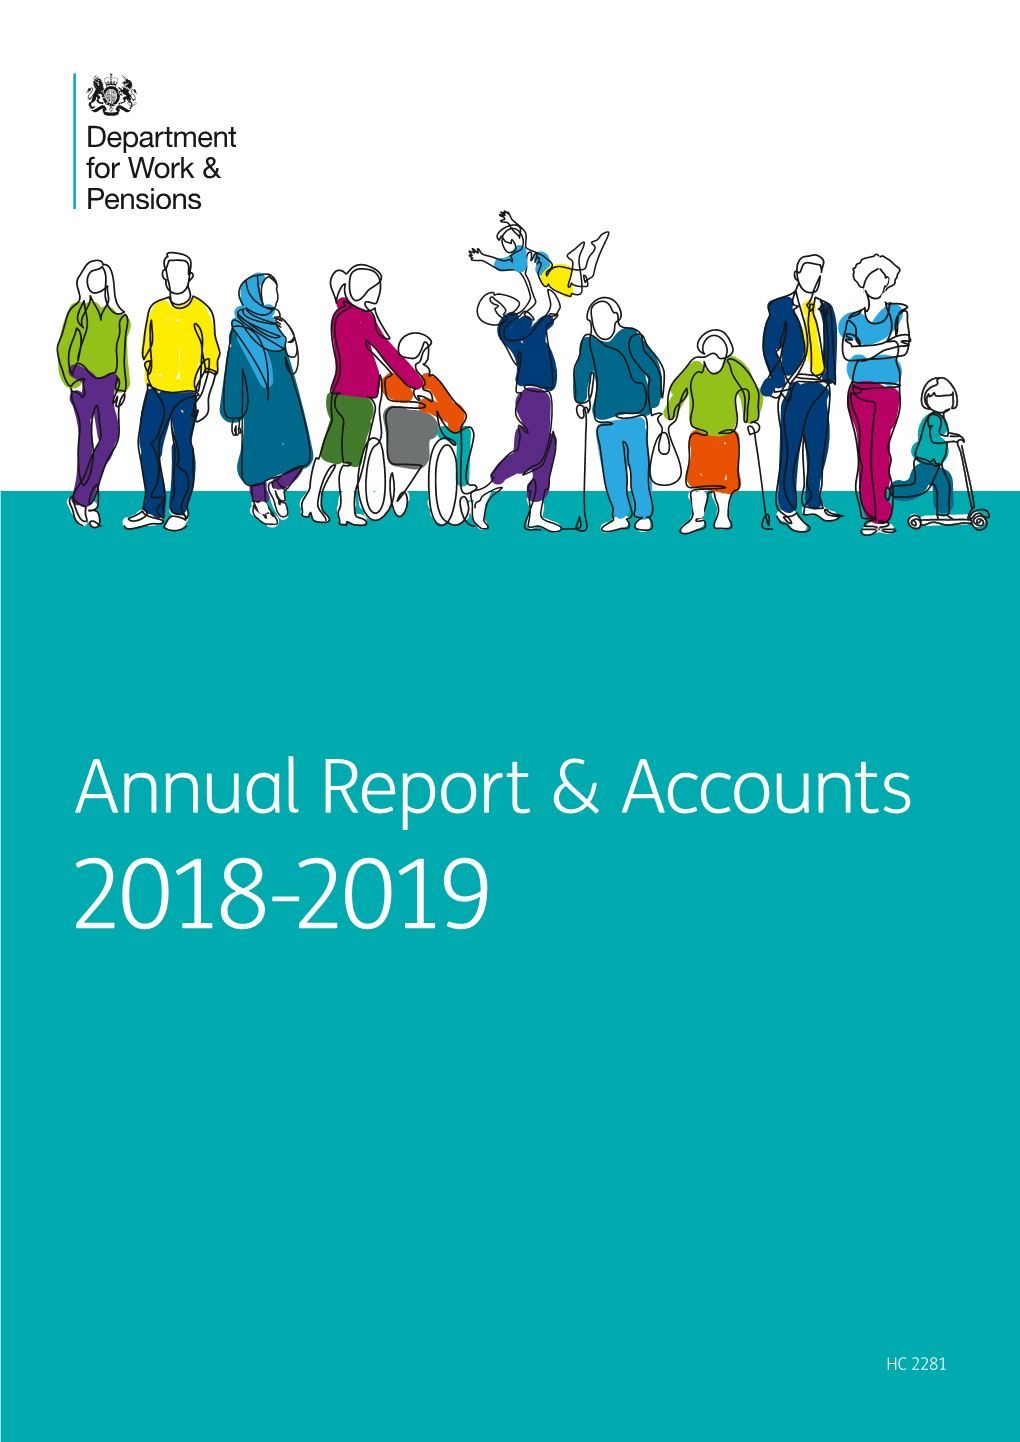 Department for Work and Pensions Annual Report and Accounts 2018-19